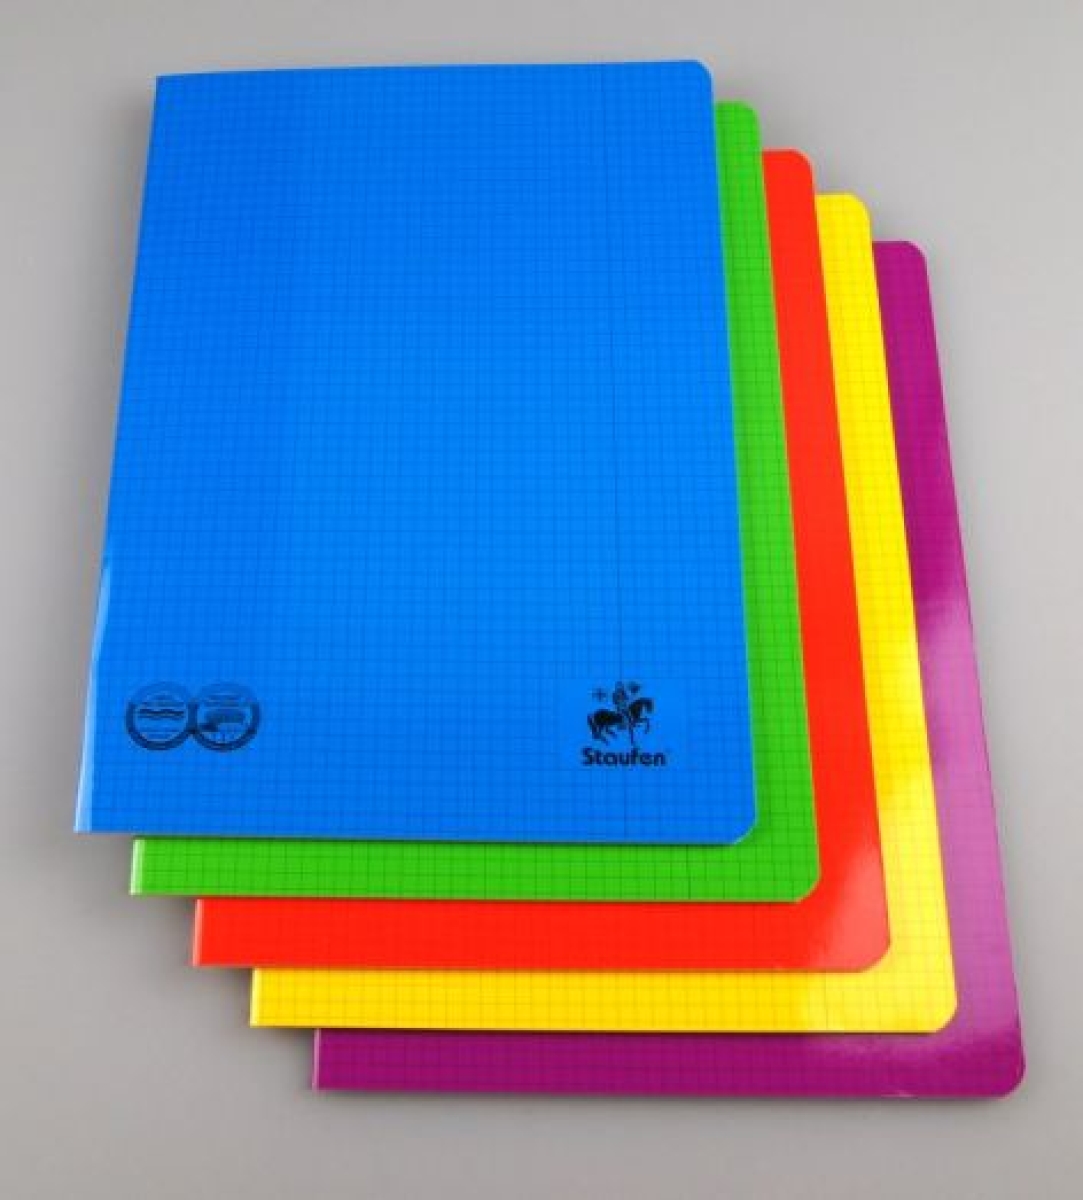 LandreDiary glossy notebook A4 - 40 sheets squared with border 14422-734014422-Price for 10 pcs.Article-No: 4006050144226